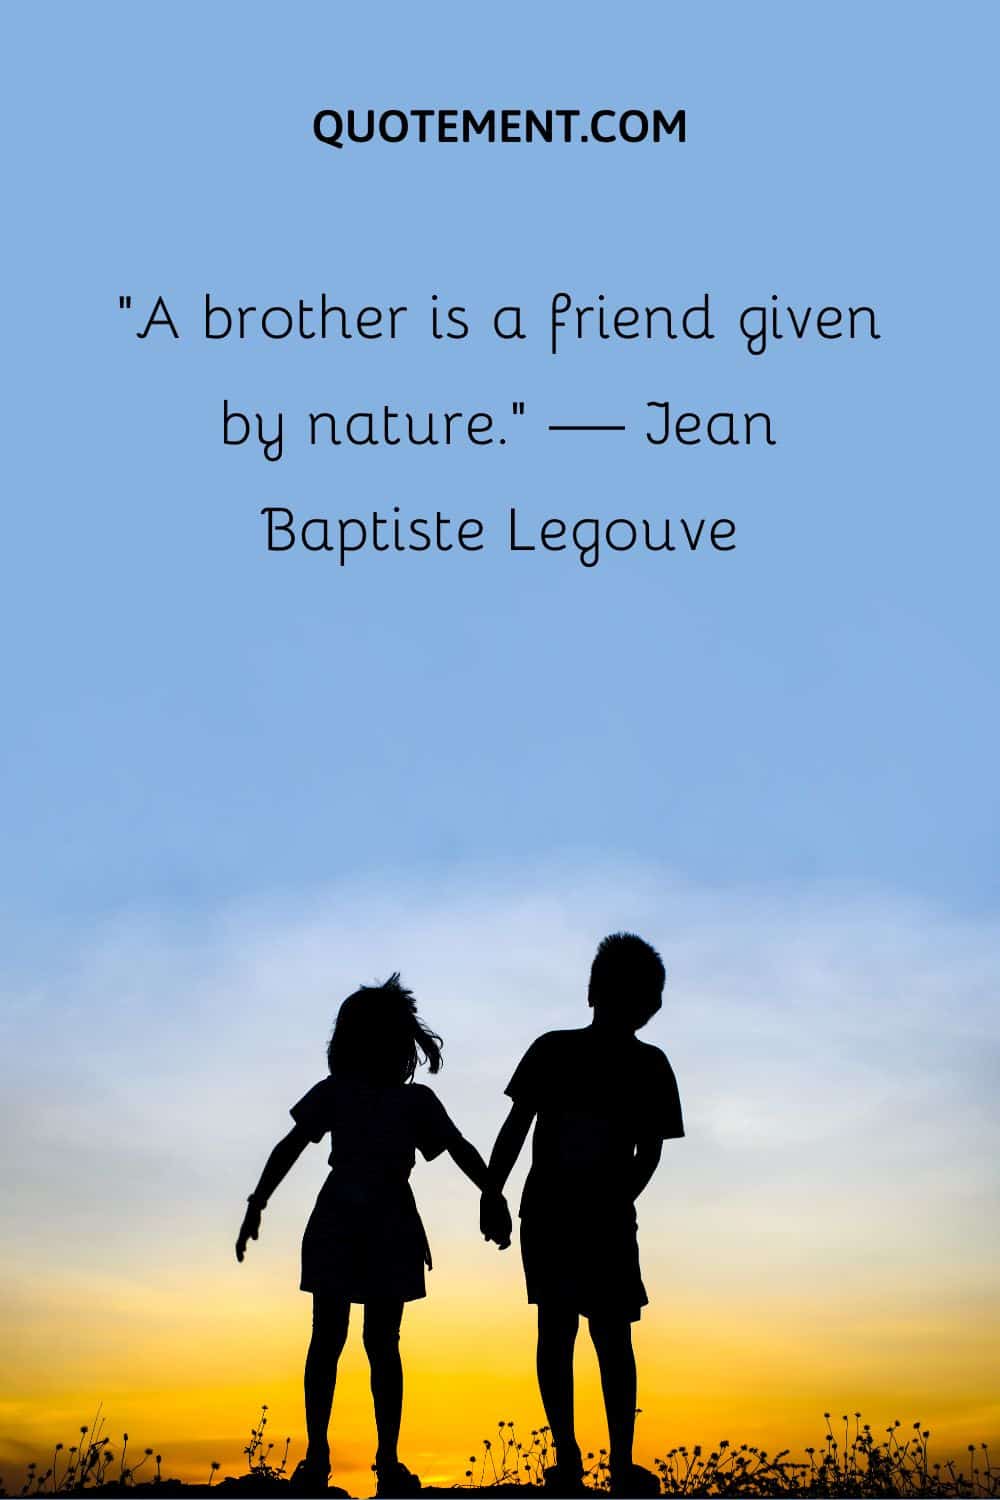 “A brother is a friend given by nature.” — Jean Baptiste Legouve